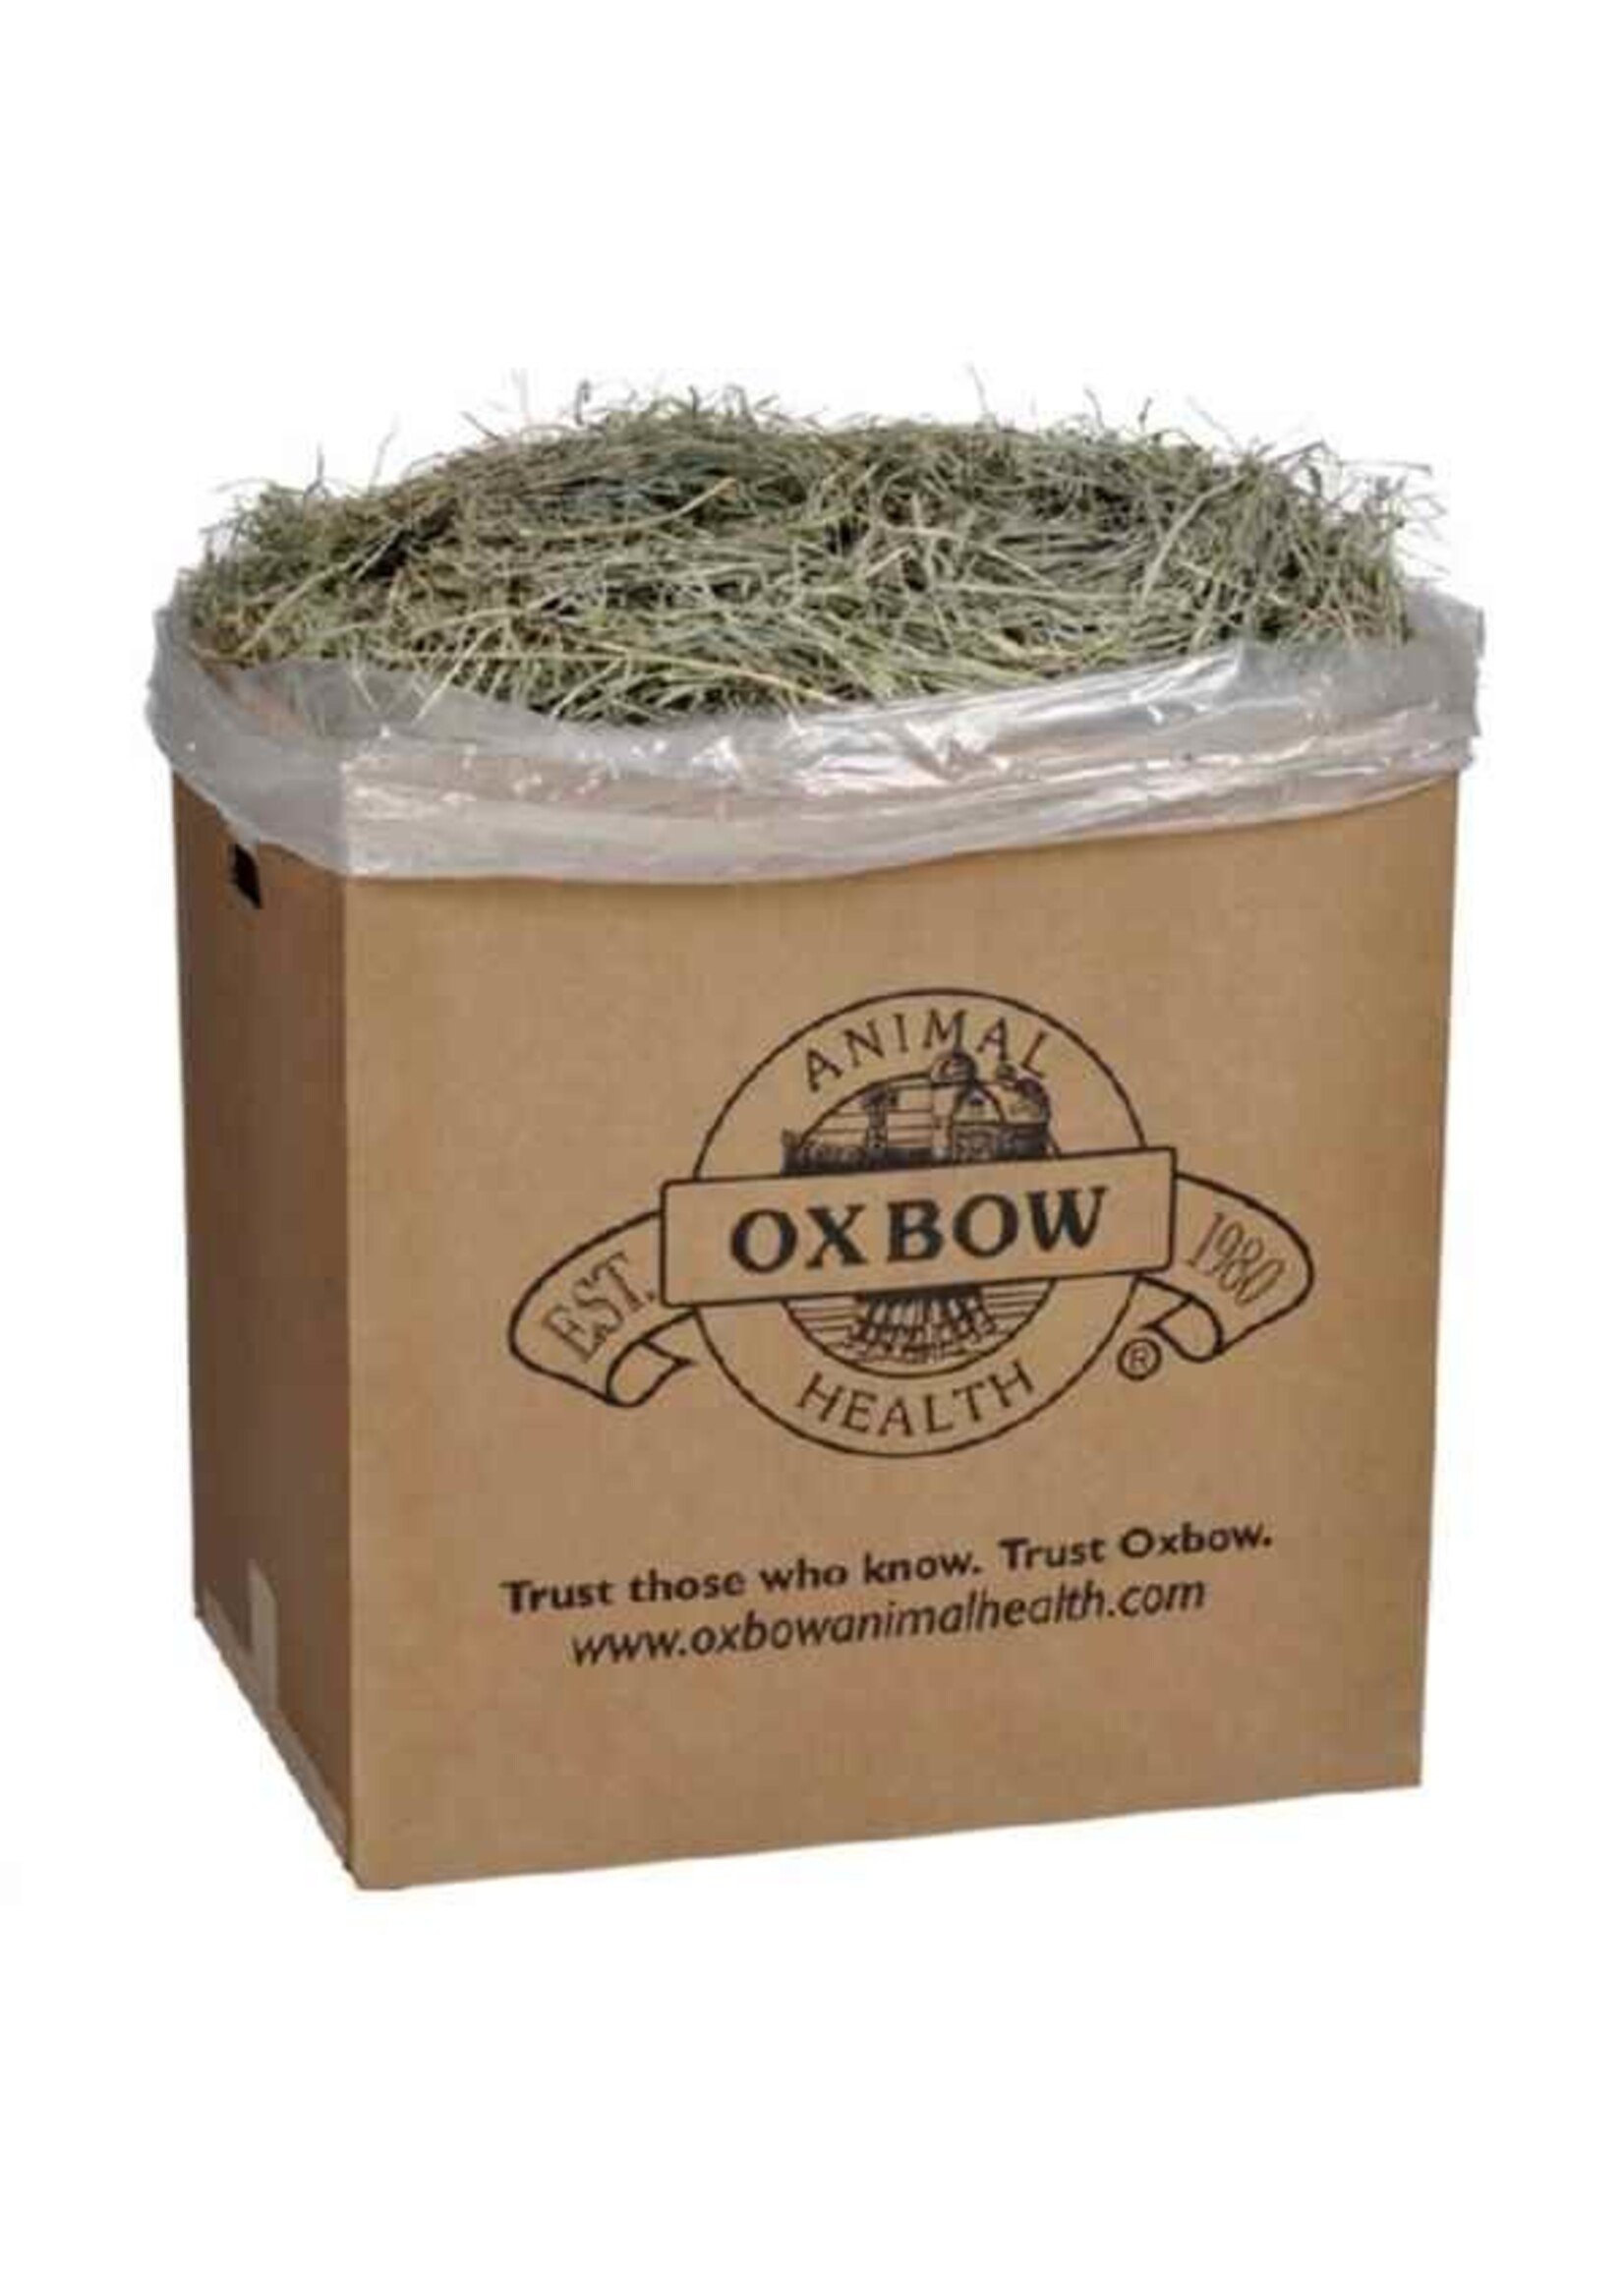 Oxbow Oxbow Orchard Grass Hay